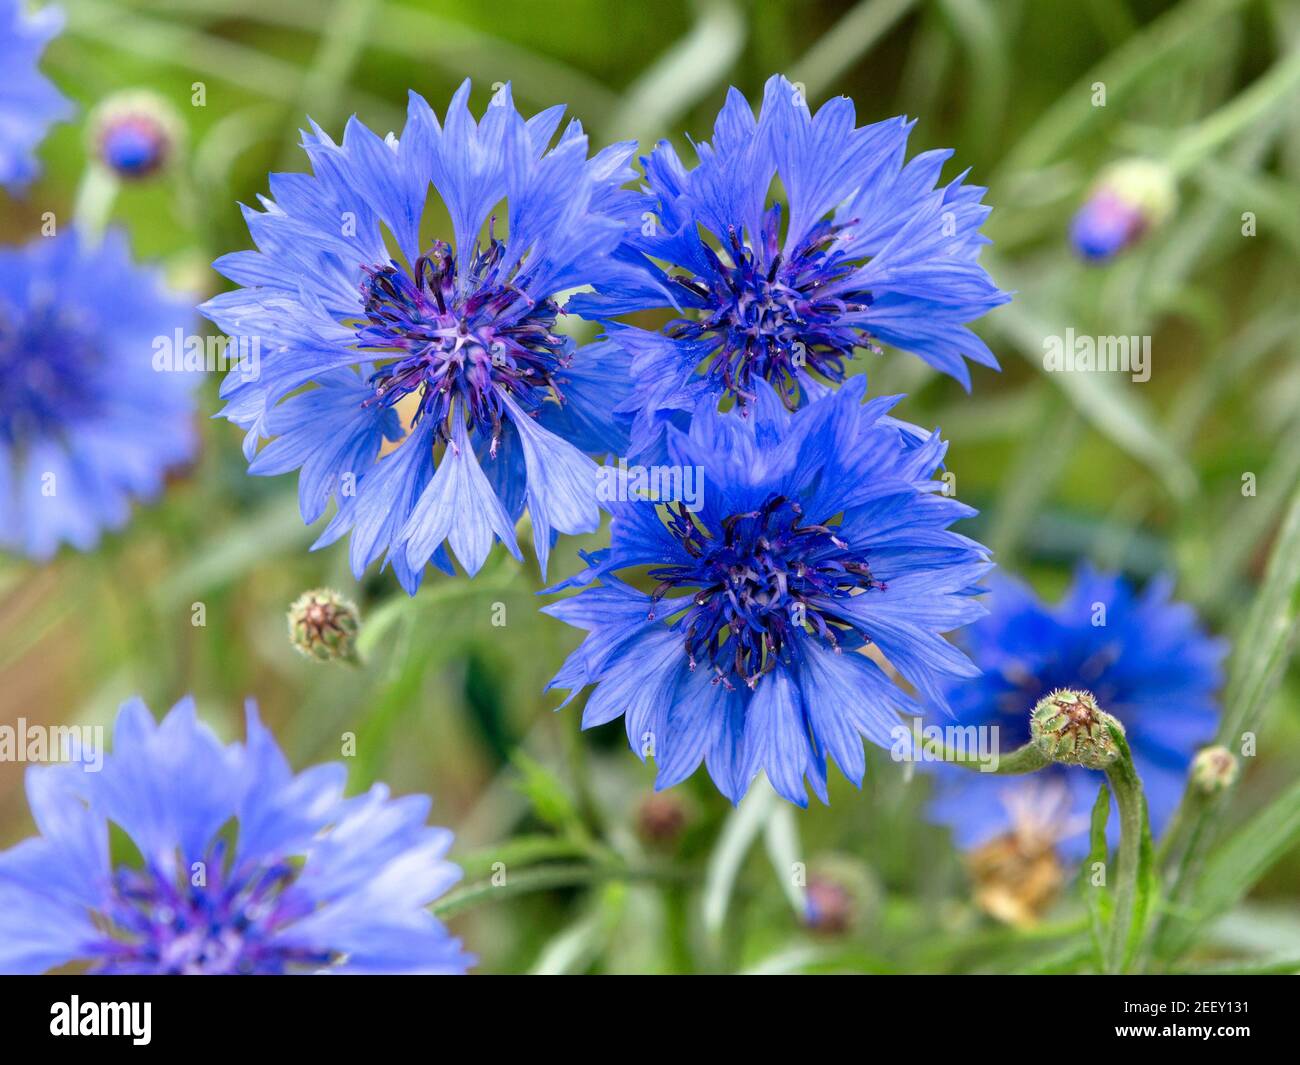 Blue flowers of cornflowers in the field. Blue cornflowers on green background. Blurred nature background with bokeh. Flowers as Background. Stock Photo